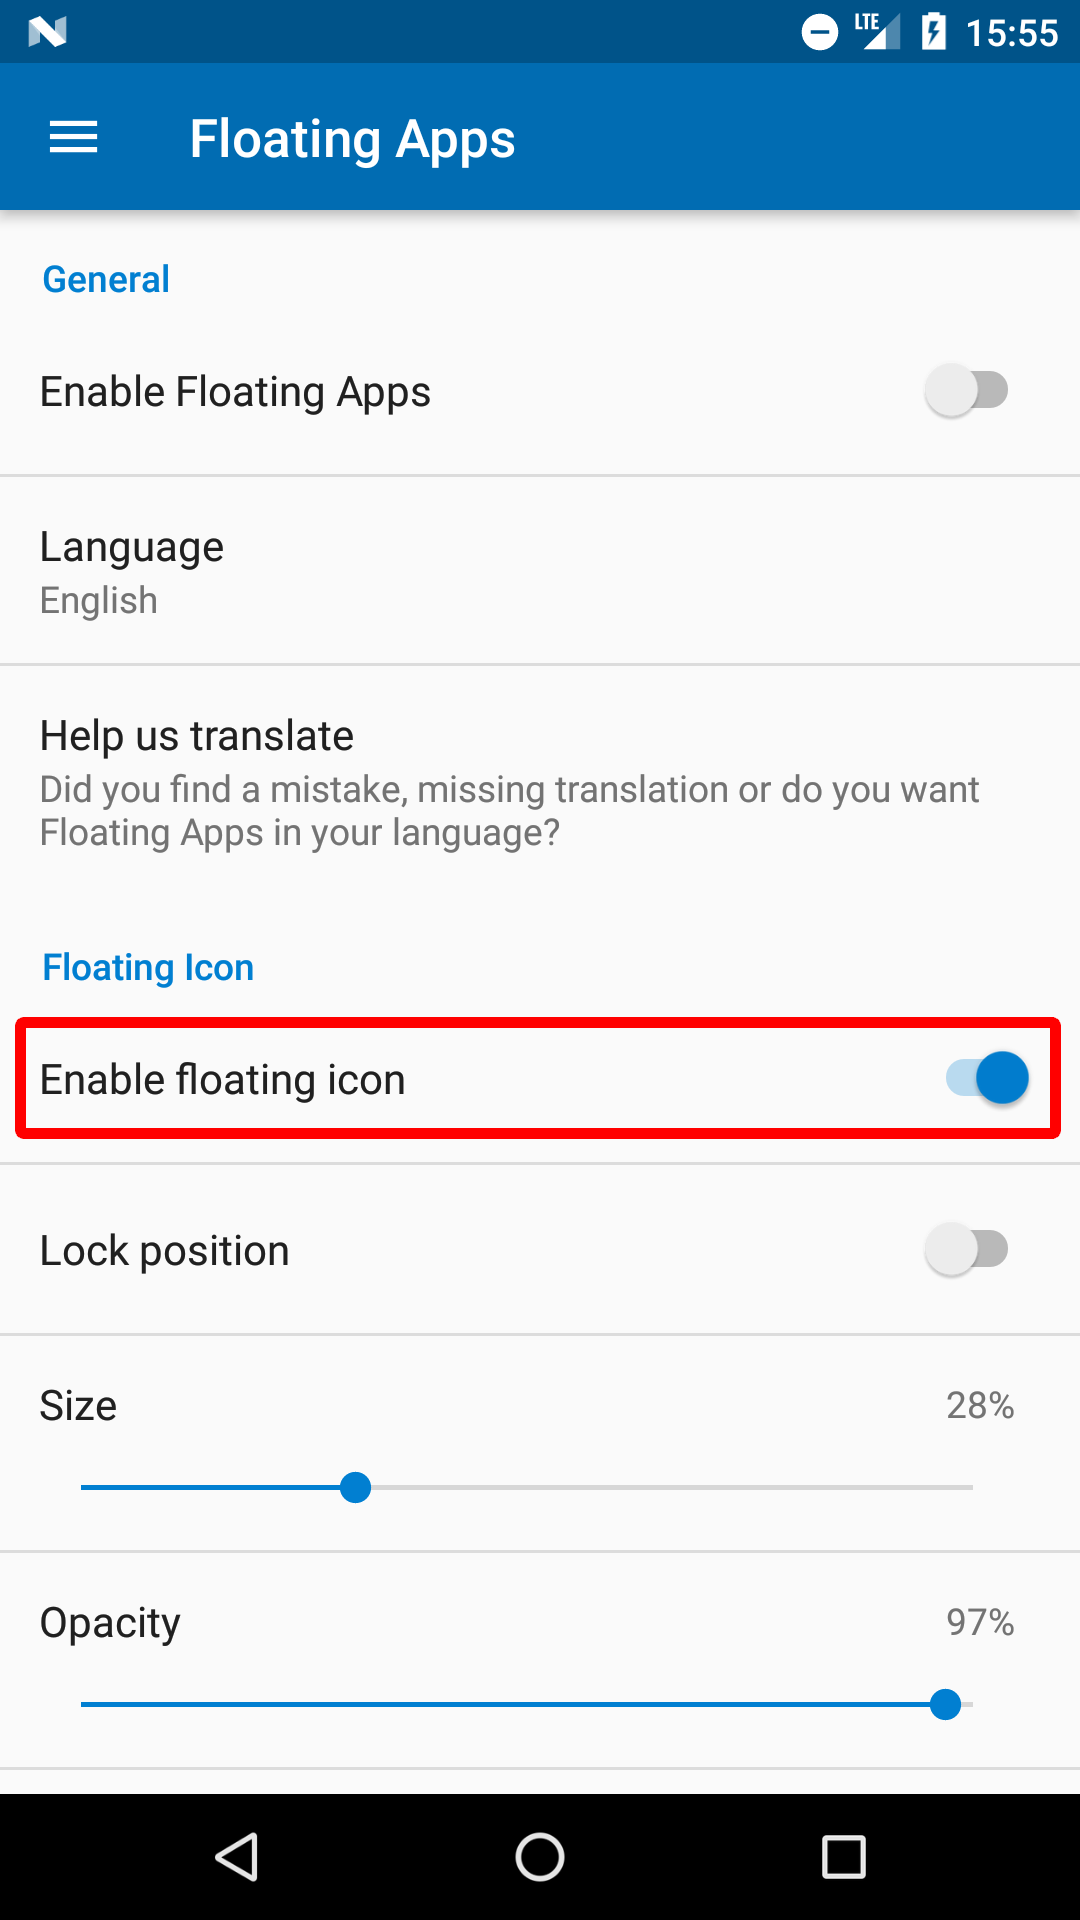 How do I enable floating?